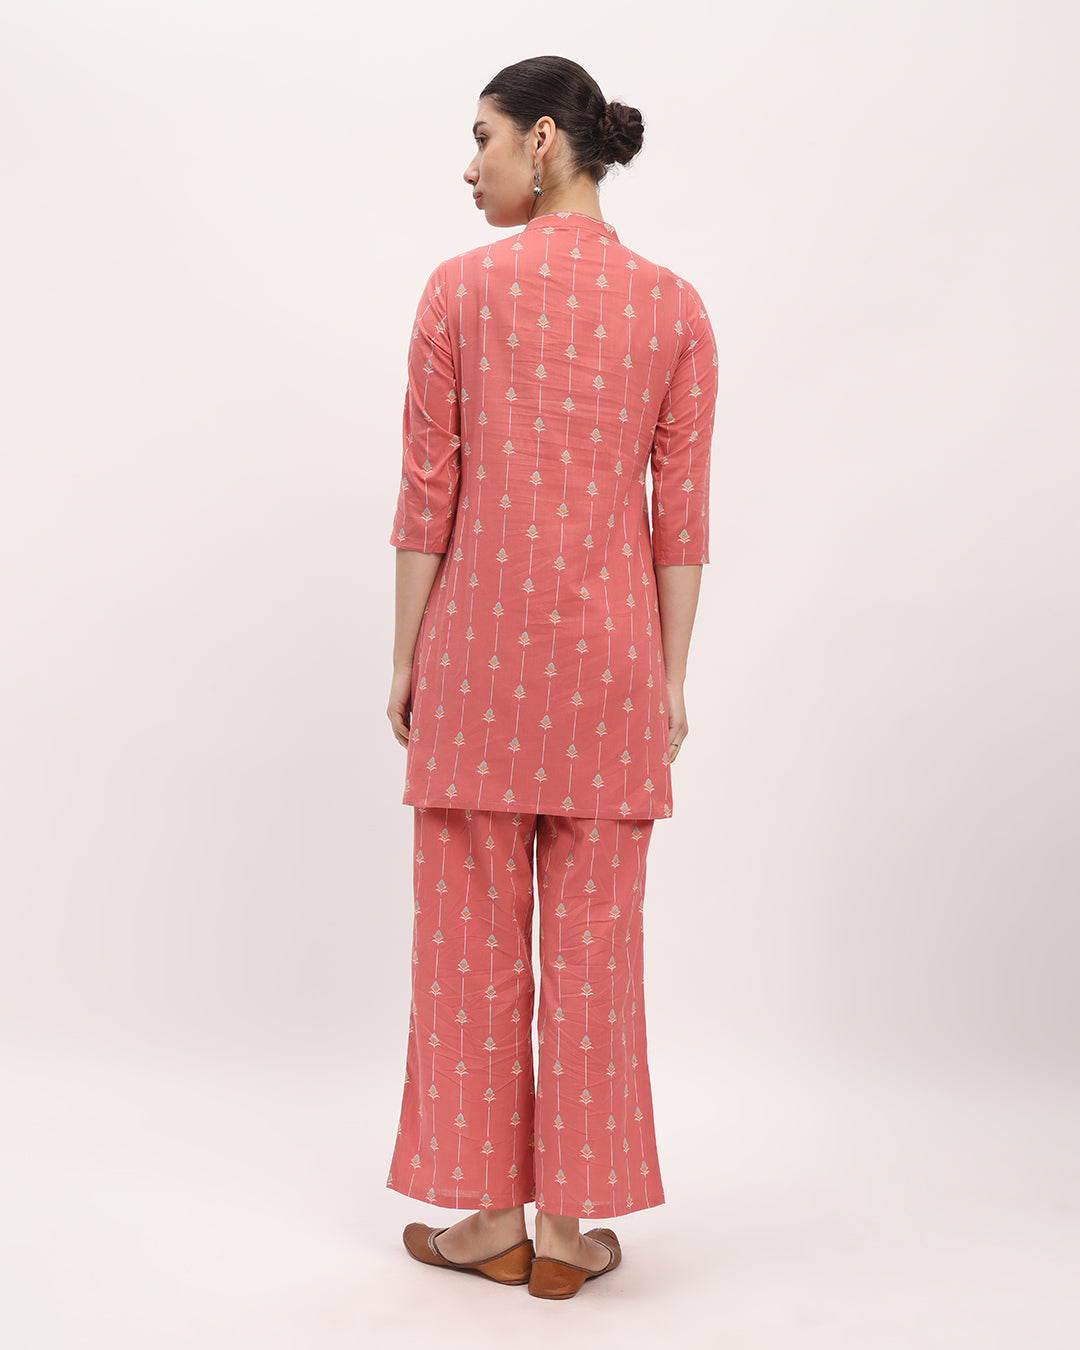 English Floral Tracks Mid Length Printed Kurta (Without Bottoms)